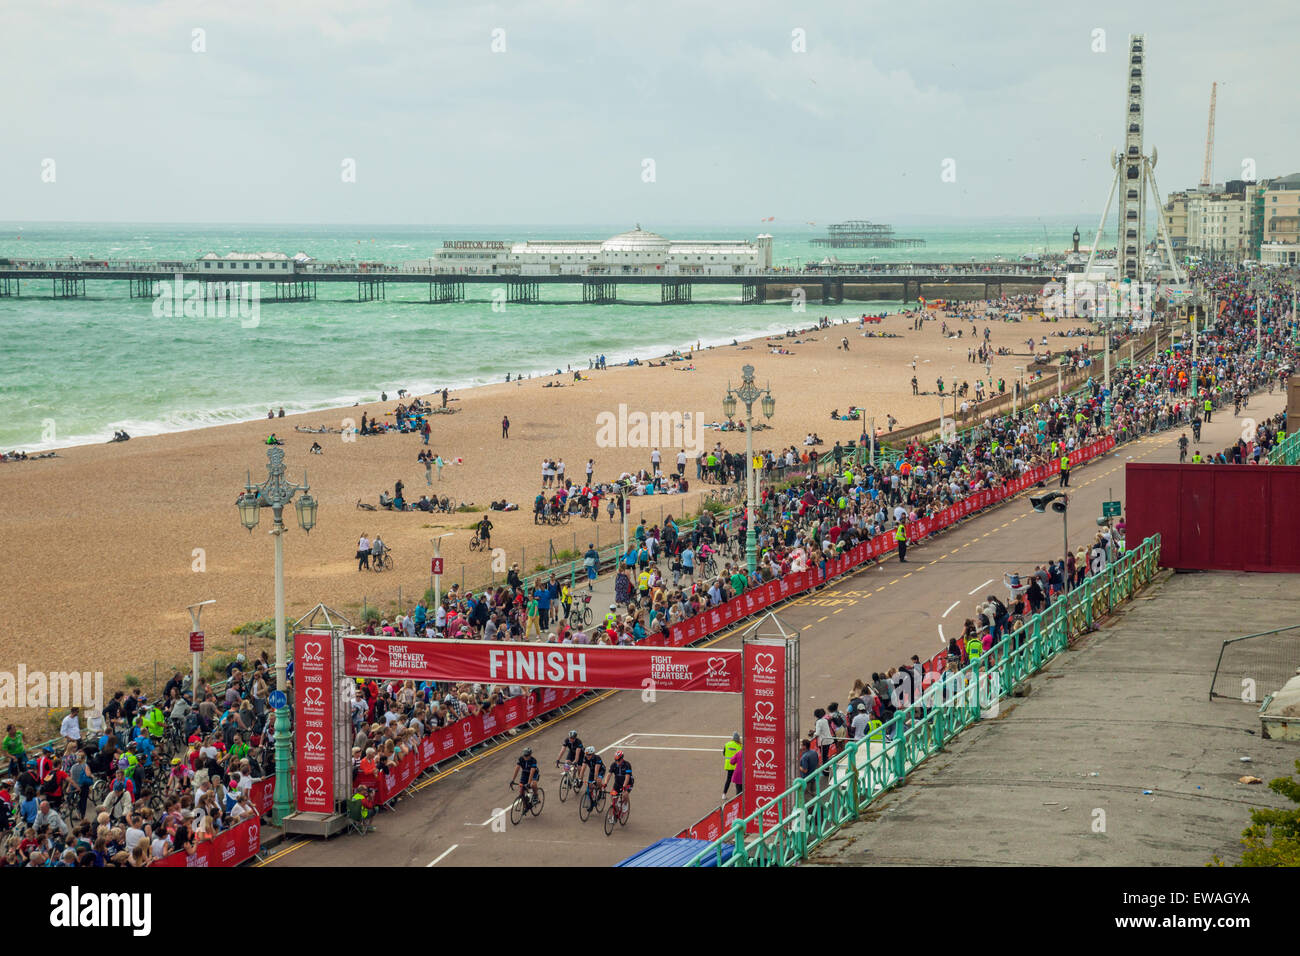 Brighton, UK. 21st June, 2015. Cyclists pass the finish line. Crowd of onlookers cheers. Brighton Eye and Palace Pier loom in the distance. Credit:  Slawek Staszczuk/Alamy Live News Stock Photo